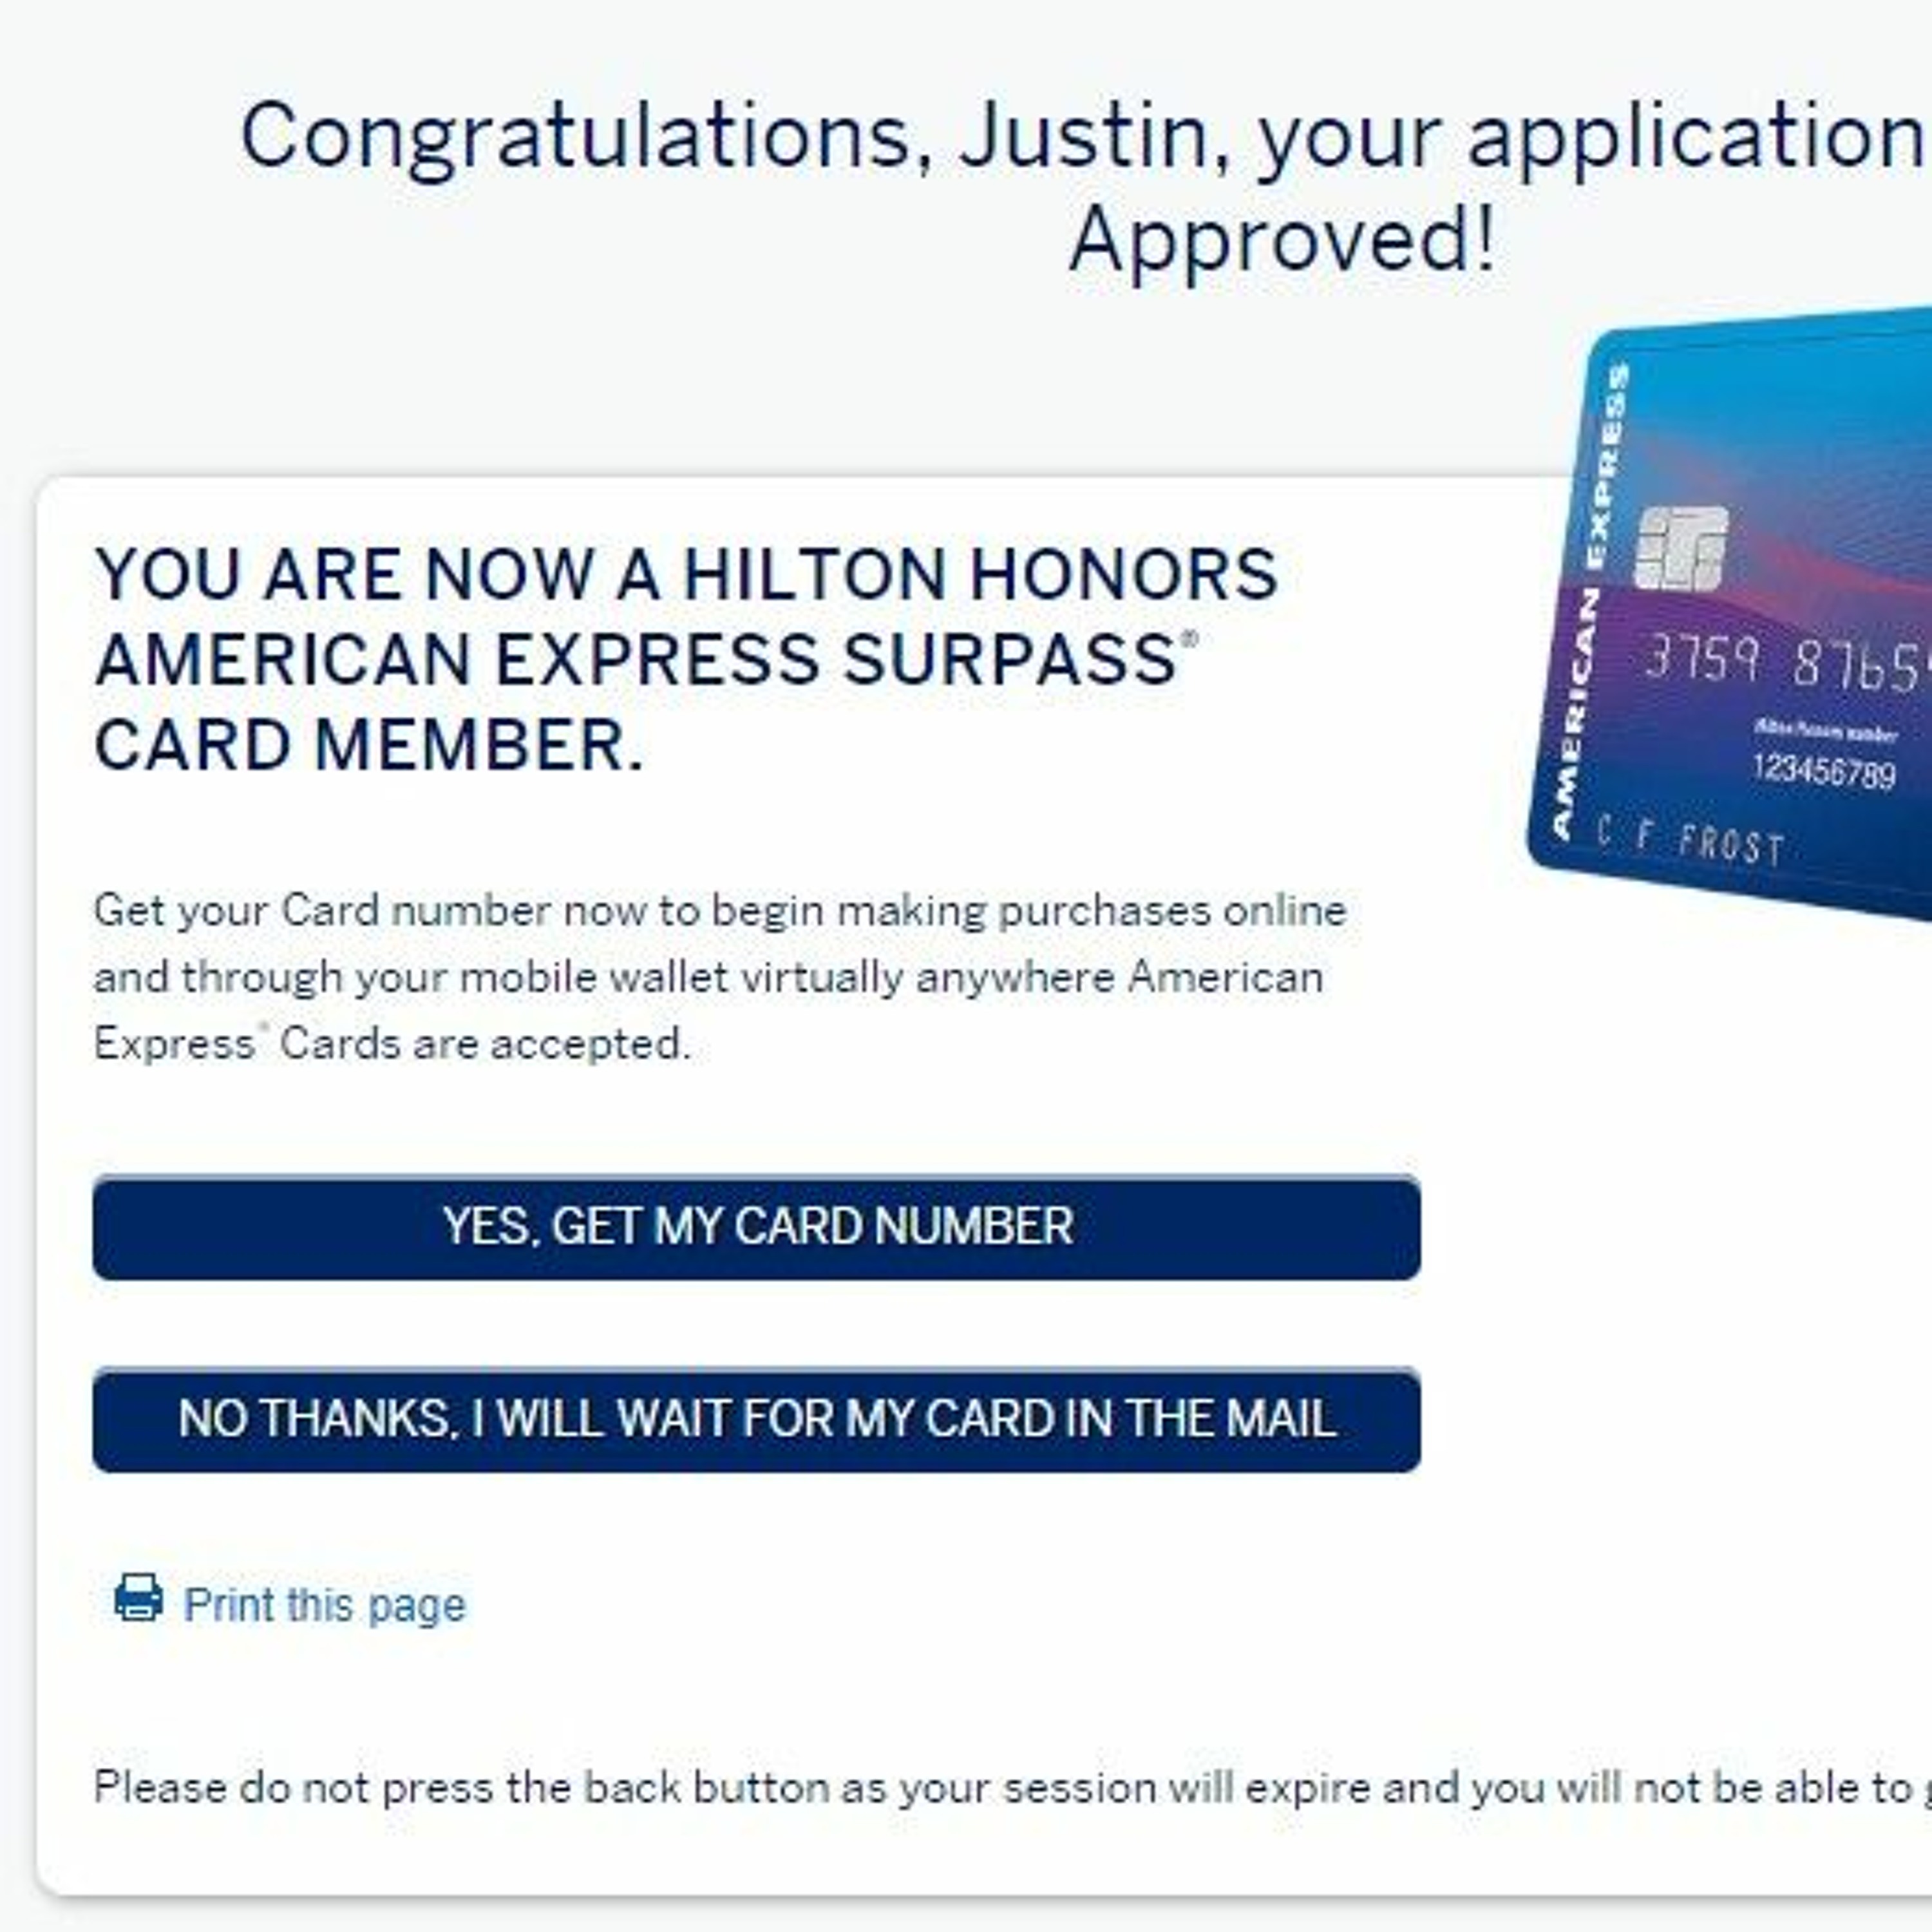 Episode 43: Amex Hilton Surpass Card Approval And Review